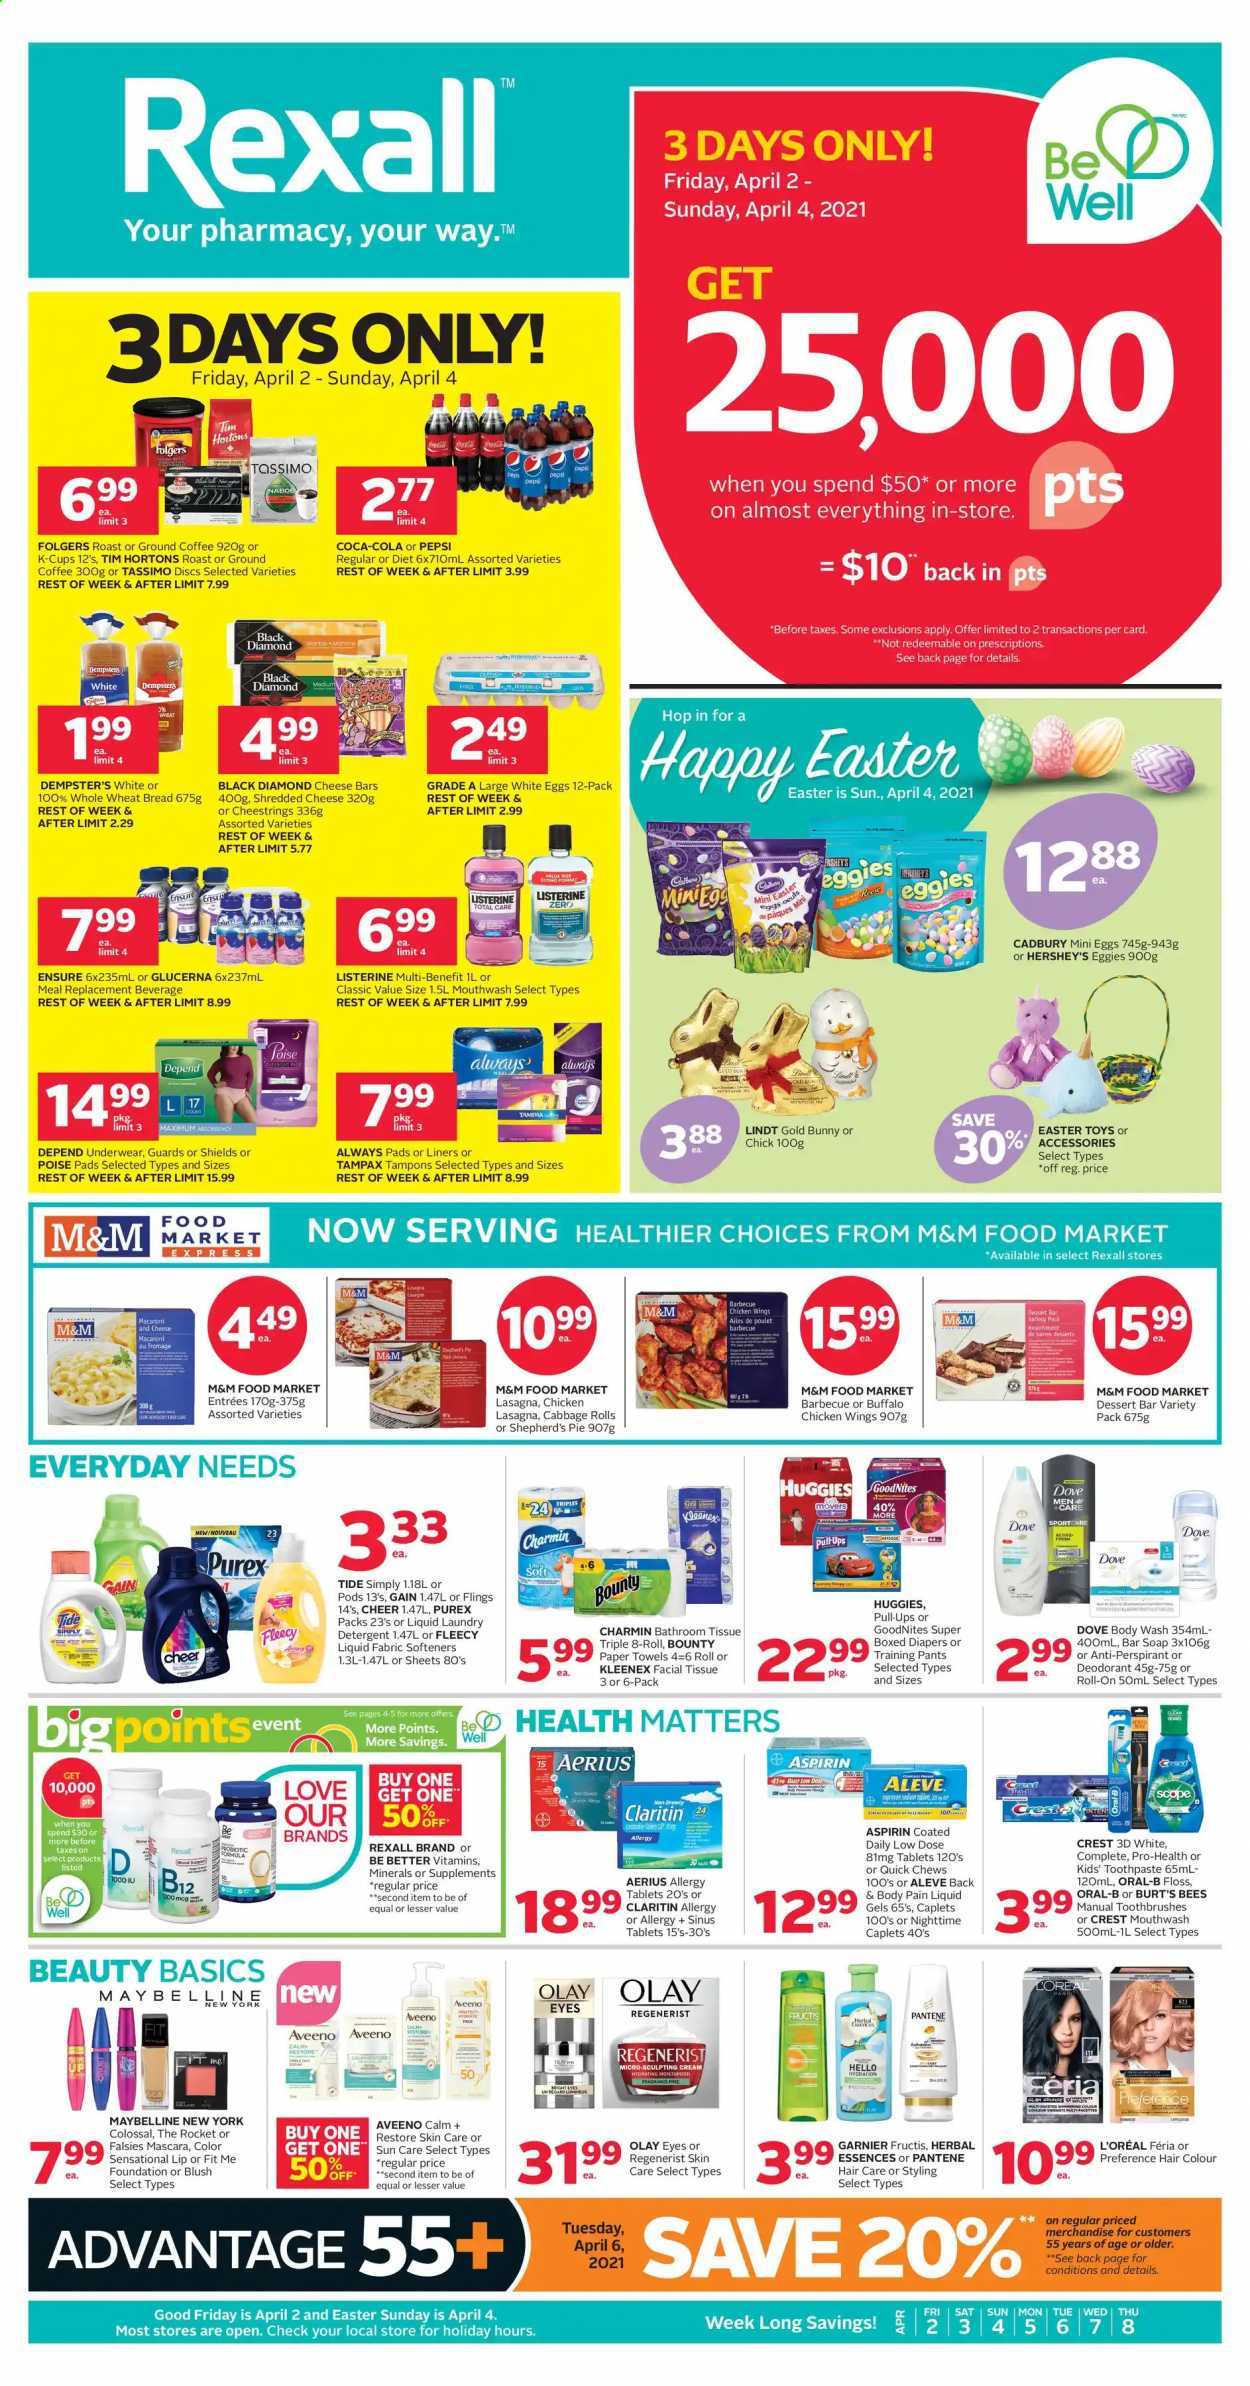 thumbnail - Rexall Flyer - April 02, 2021 - April 08, 2021 - Sales products - Bounty, chewing gum, Hershey's, Cadbury, cabbage, Coca-Cola, Pepsi, coffee, Folgers, ground coffee, coffee capsules, K-Cups, nappies, Aveeno, bath tissue, Kleenex, kitchen towels, paper towels, Charmin, Gain, Tide, laundry detergent, Purex, body wash, soap bar, soap, toothpaste, mouthwash, Crest, Always pads, sanitary pads, tampons, L’Oréal, moisturizer, Olay, hair color, Herbal Essences, Fructis, anti-perspirant, roll-on, Aleve, Glucerna, Low Dose, aspirin, Garnier, Listerine, mascara, Maybelline, Tampax, Huggies, Pantene, Oral-B, M&M's, deodorant. Page 1.